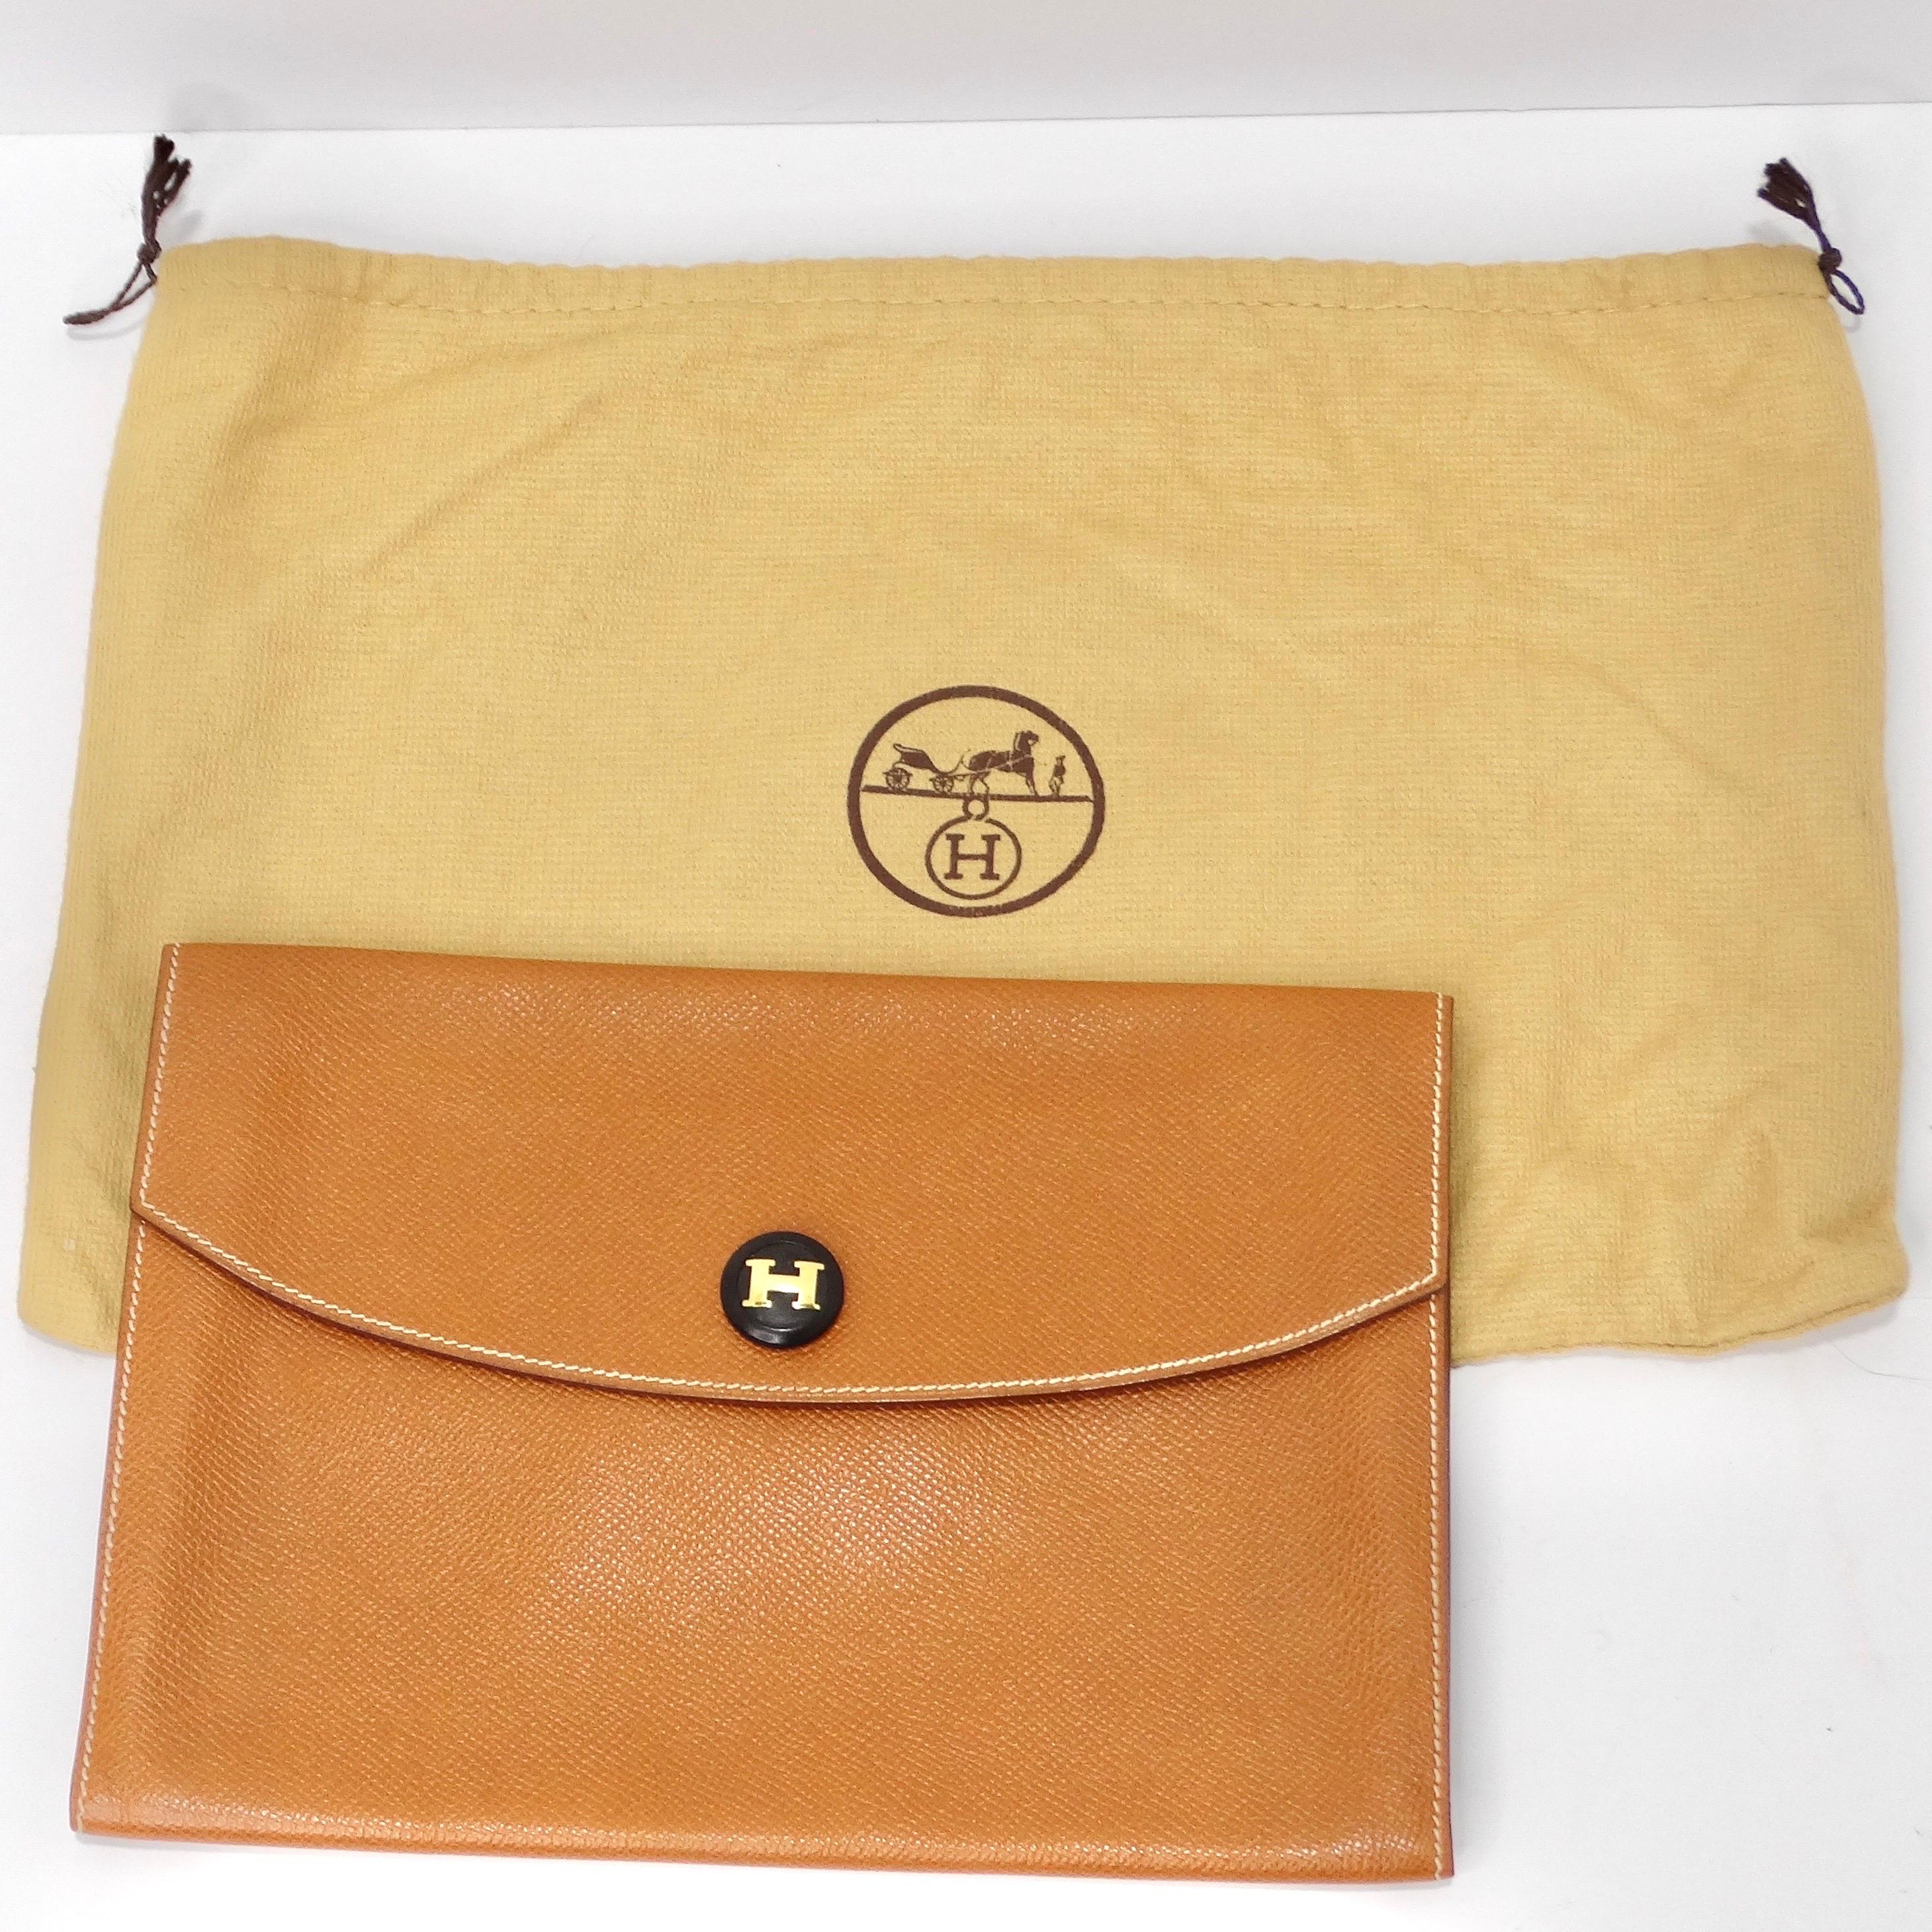 Introducing the epitome of timeless elegance - the Hermes Rio Envelope Pochette in a camel tone brown. This luxurious accessory features a chic snap-style closure and a striking black button at the center, adorned with a captivating gold-tone 'H'